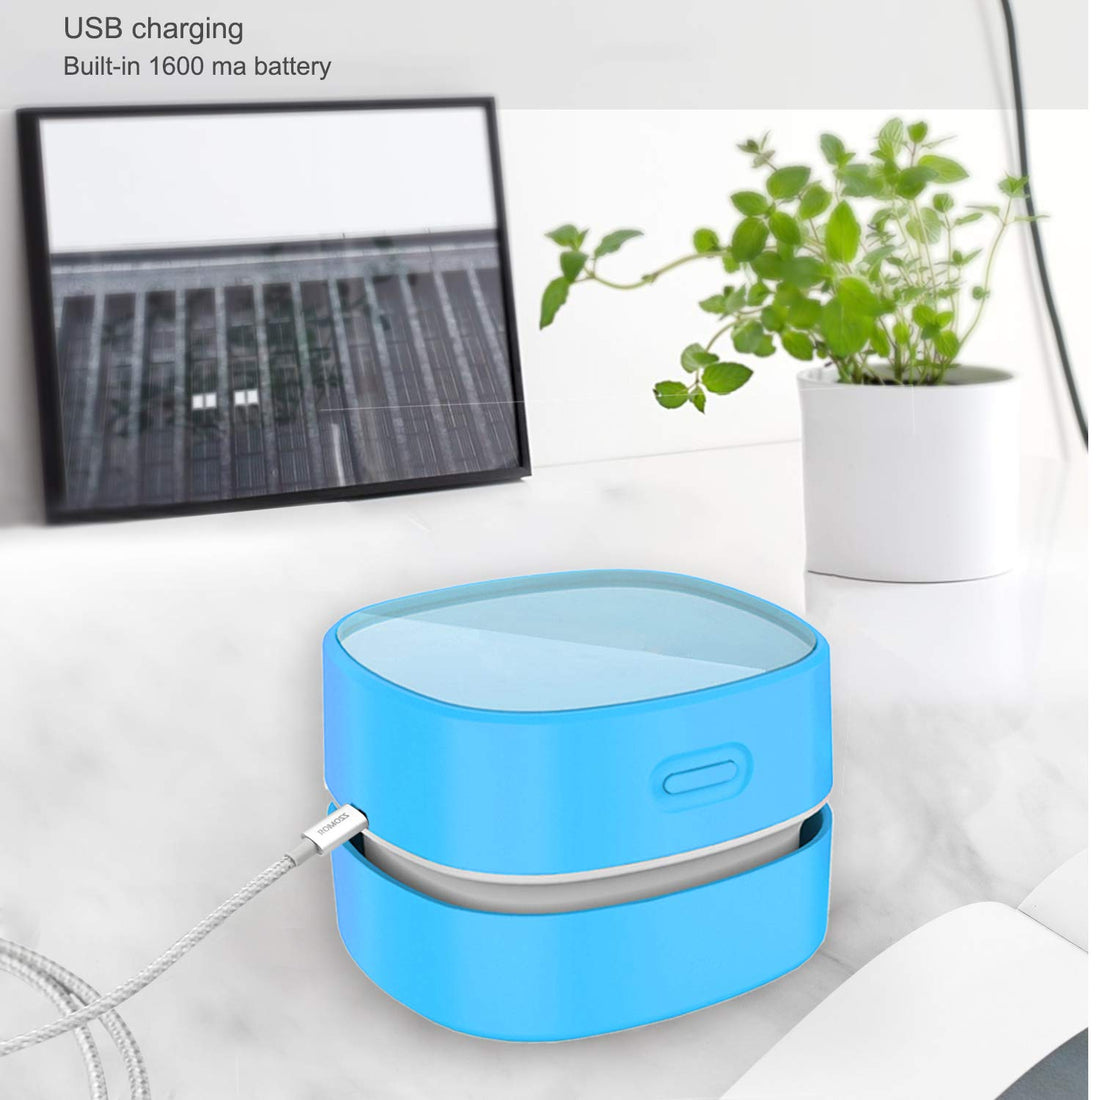 ODISTAR Desktop Vacuum cleaner,Mini table dust sweeper Energy Saving,High endurance up to 400 mins,Cordless&360º Rotatable Design for Cleaning Hairs,Crumbs,Computer Keyboard of kid gift(blue charging)